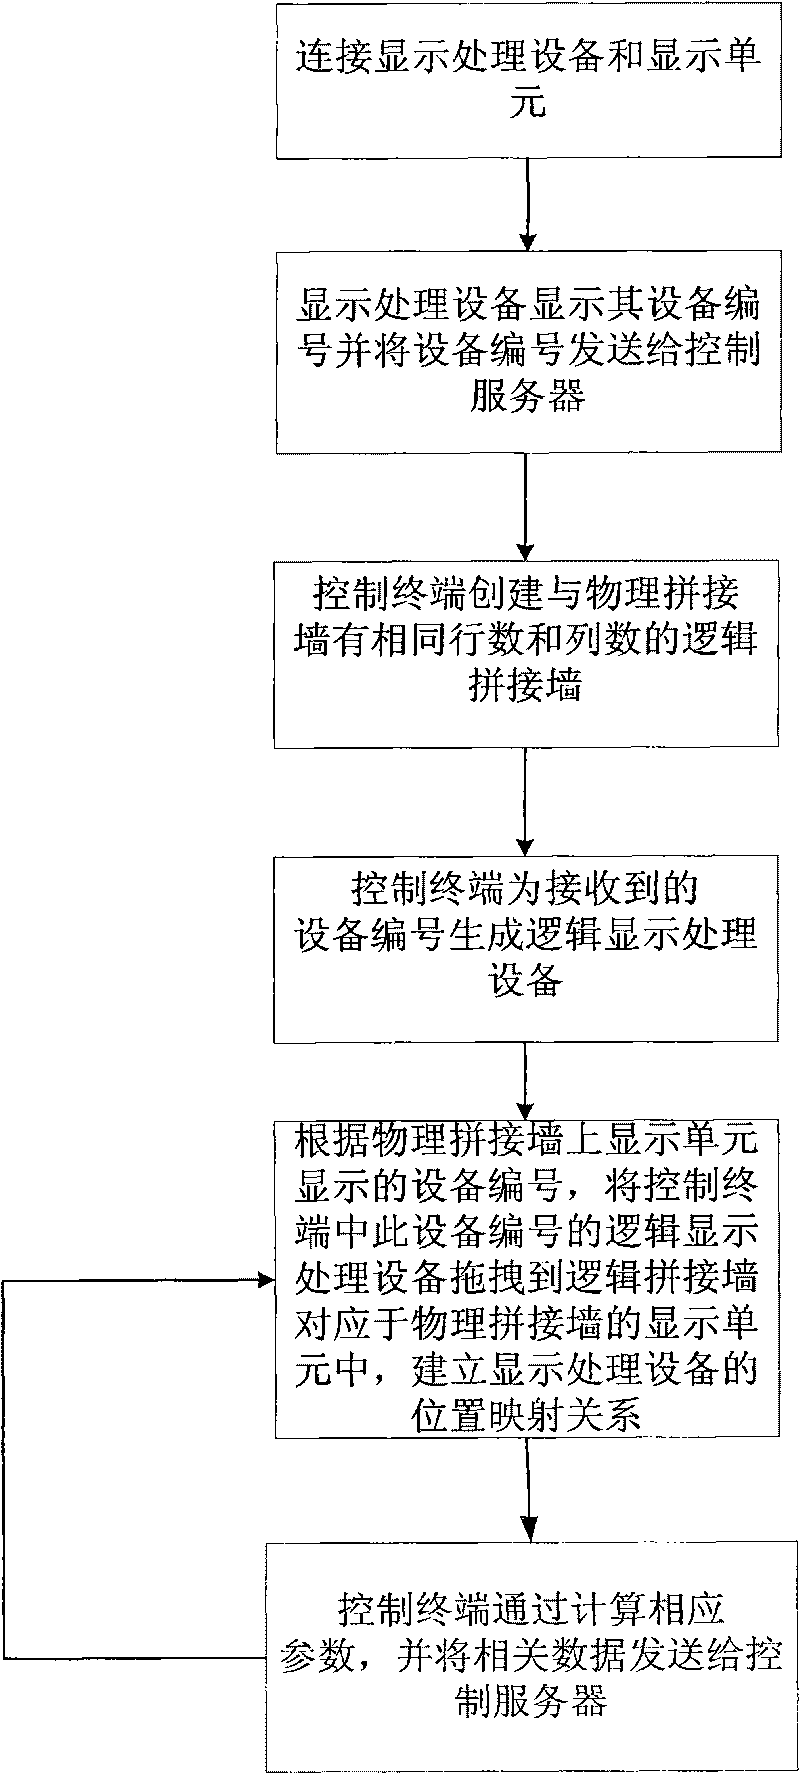 Spliced wall body allocation system and position mapping method for establishing display units